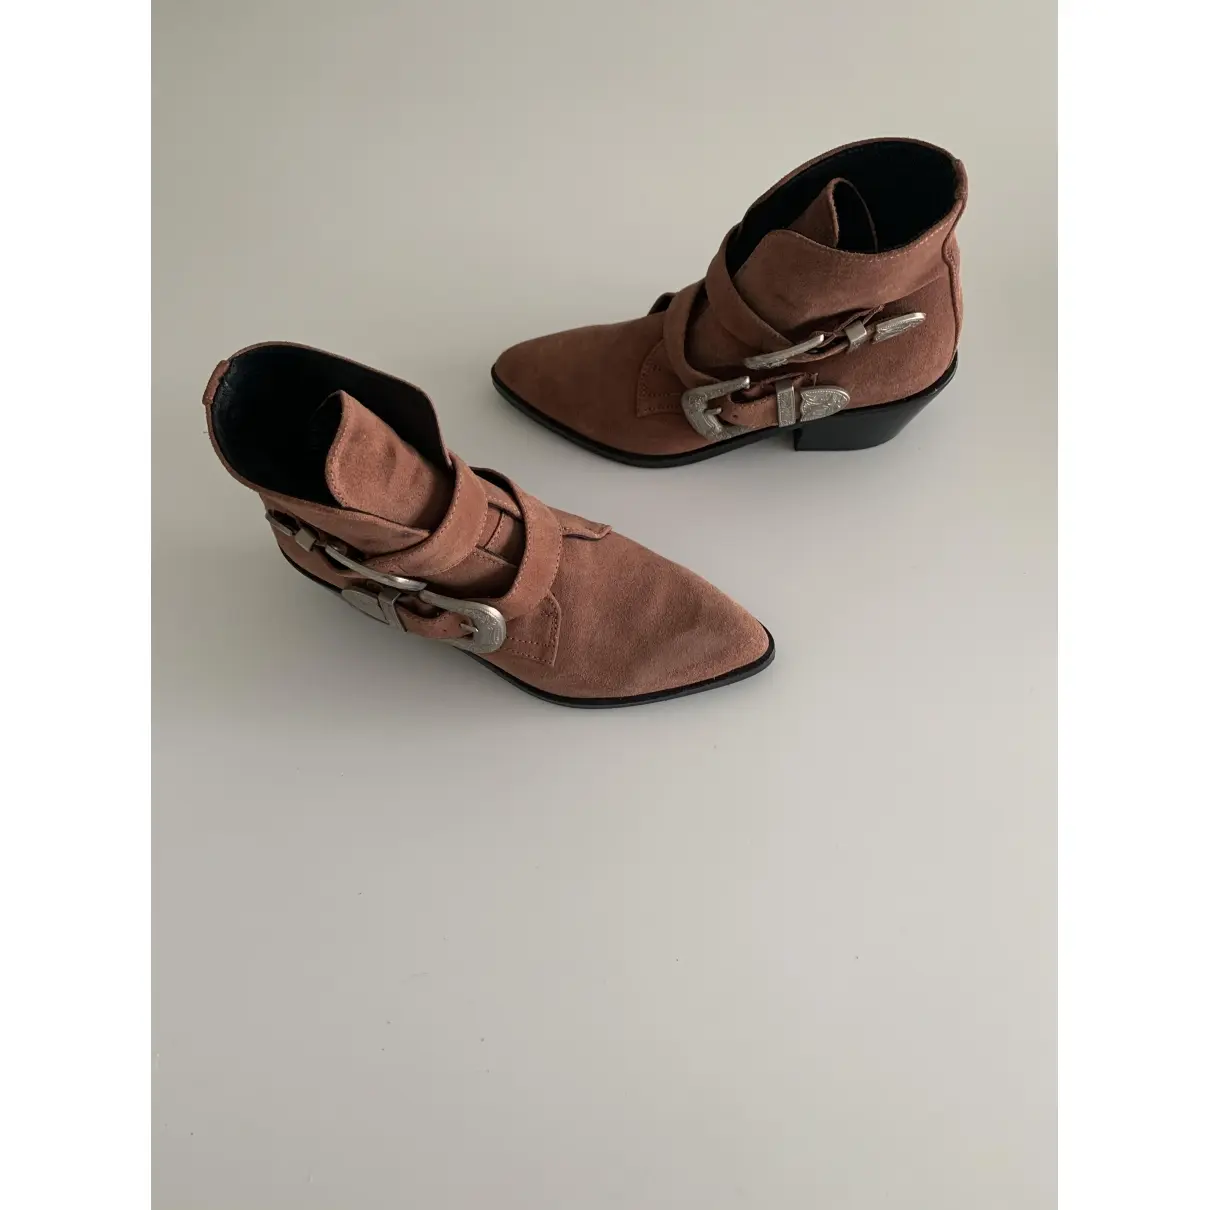 Bimba y Lola Leather ankle boots for sale